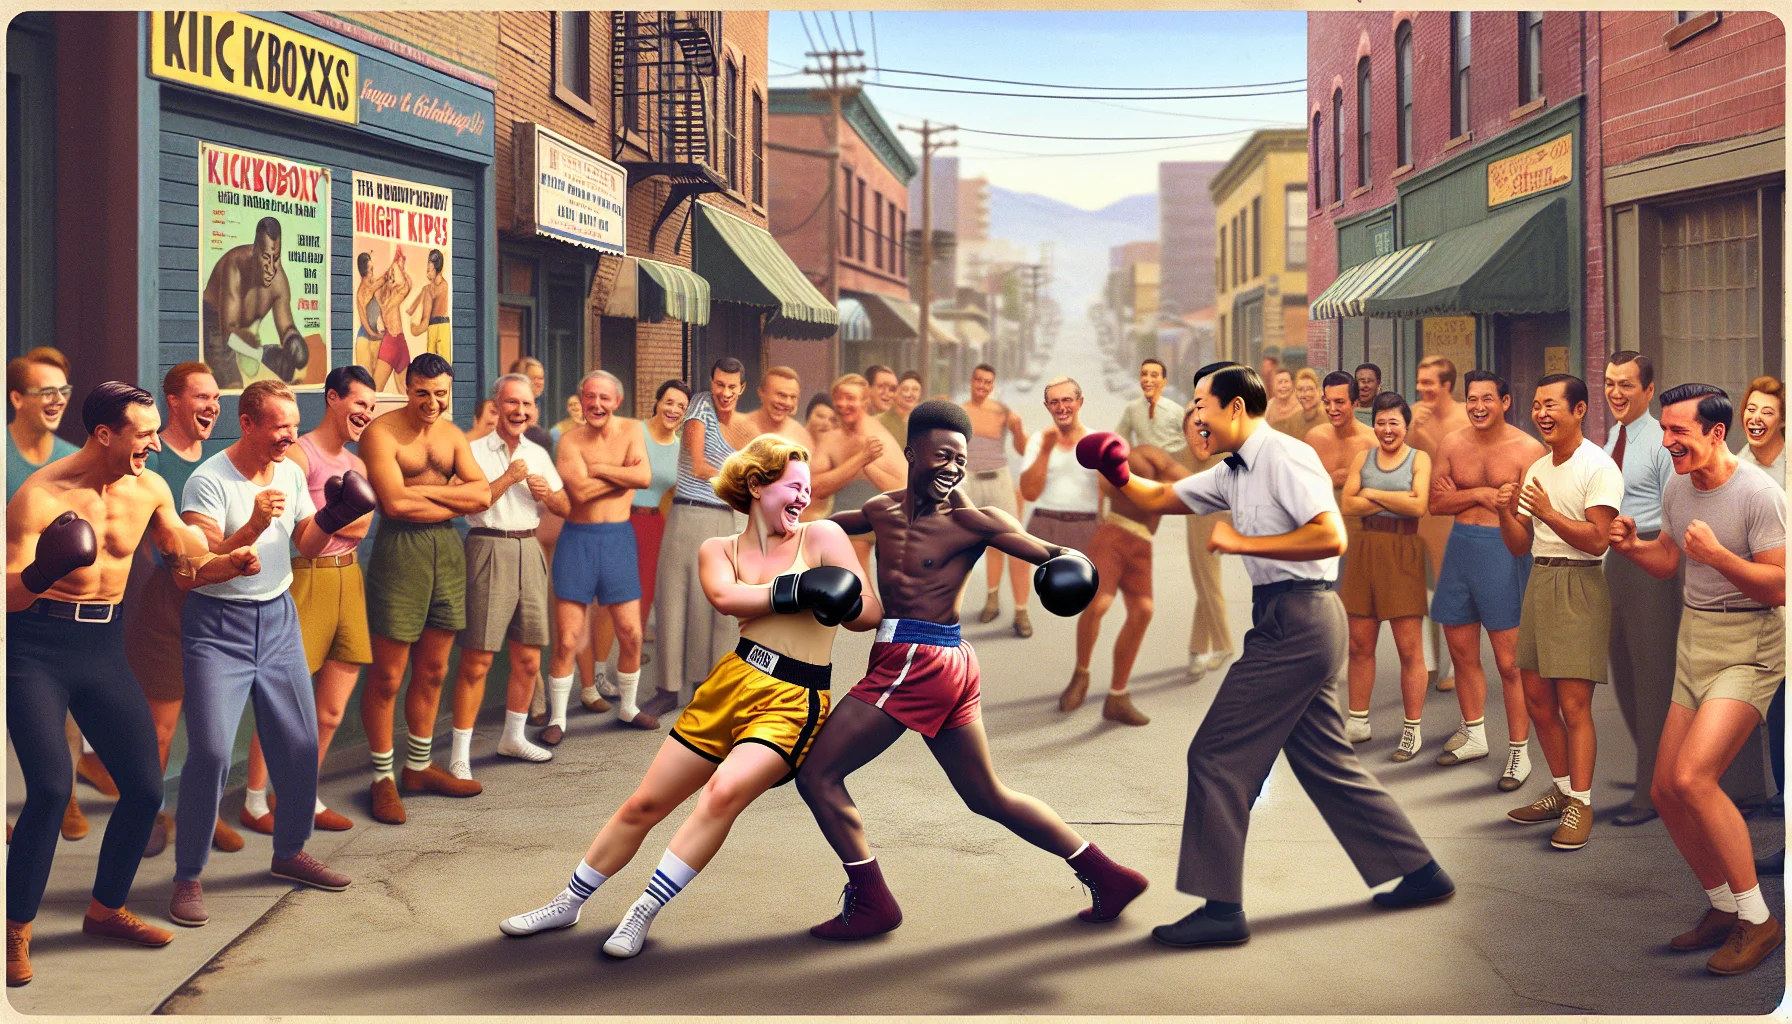 Create a humorous, realistic image showcasing kickboxing in an urban setting. Picture a street turned impromptu kickboxing ring in mid-century era Reno City with a diverse mix of people engaged in a friendly communal workout. Visualize a Caucasian female amateur kickboxer playfully dodging a Middle Eastern male pro's lightweight punch while a crowd of South Asian and Black bystanders cheer on, encouraging everyone to join in with light-hearted banter and posters promoting fitness.